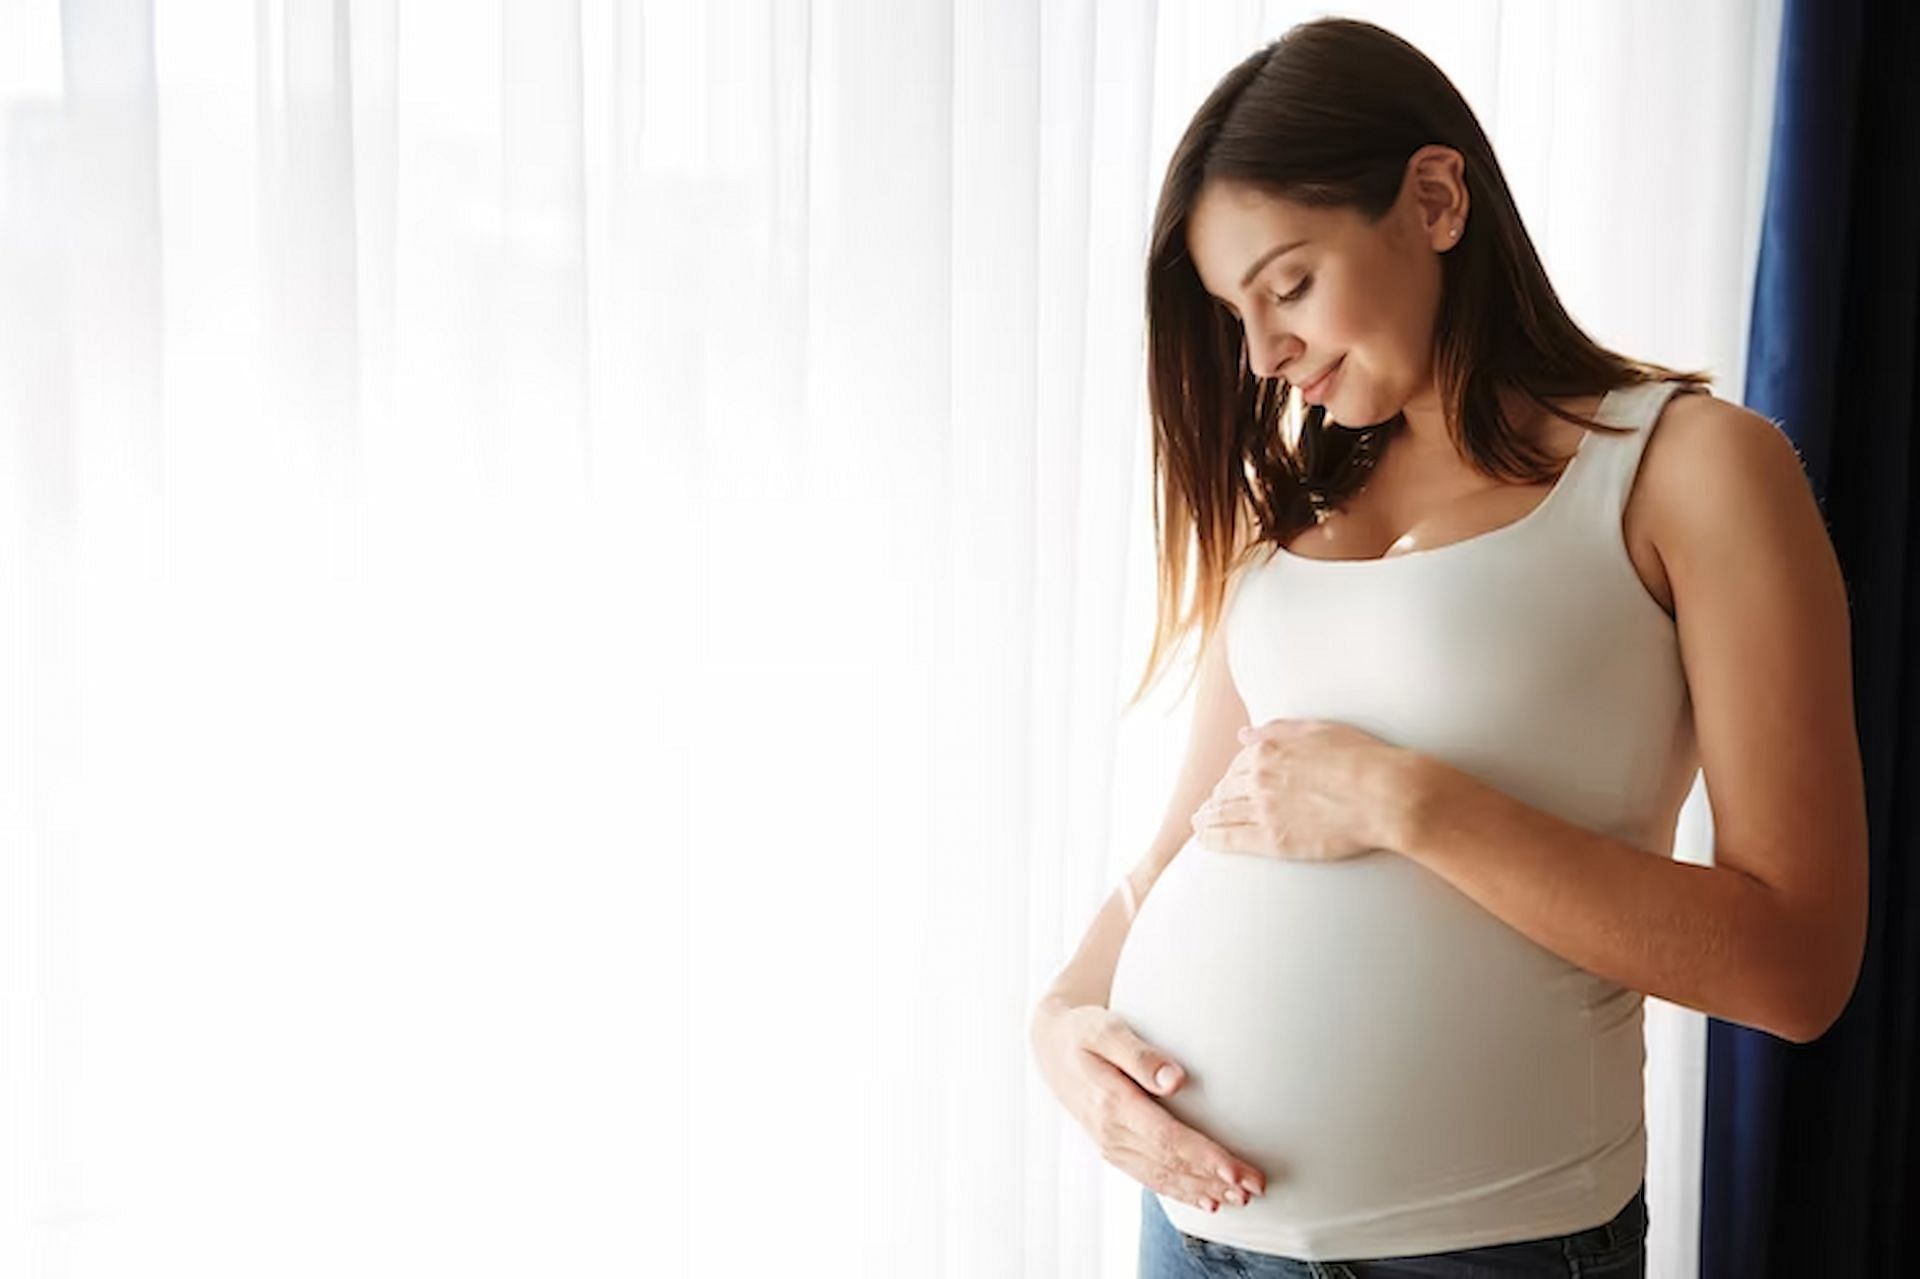 Pregnant women must keep away from abdominal massages due to reasons of safety (Image via freepik/drobotdean)